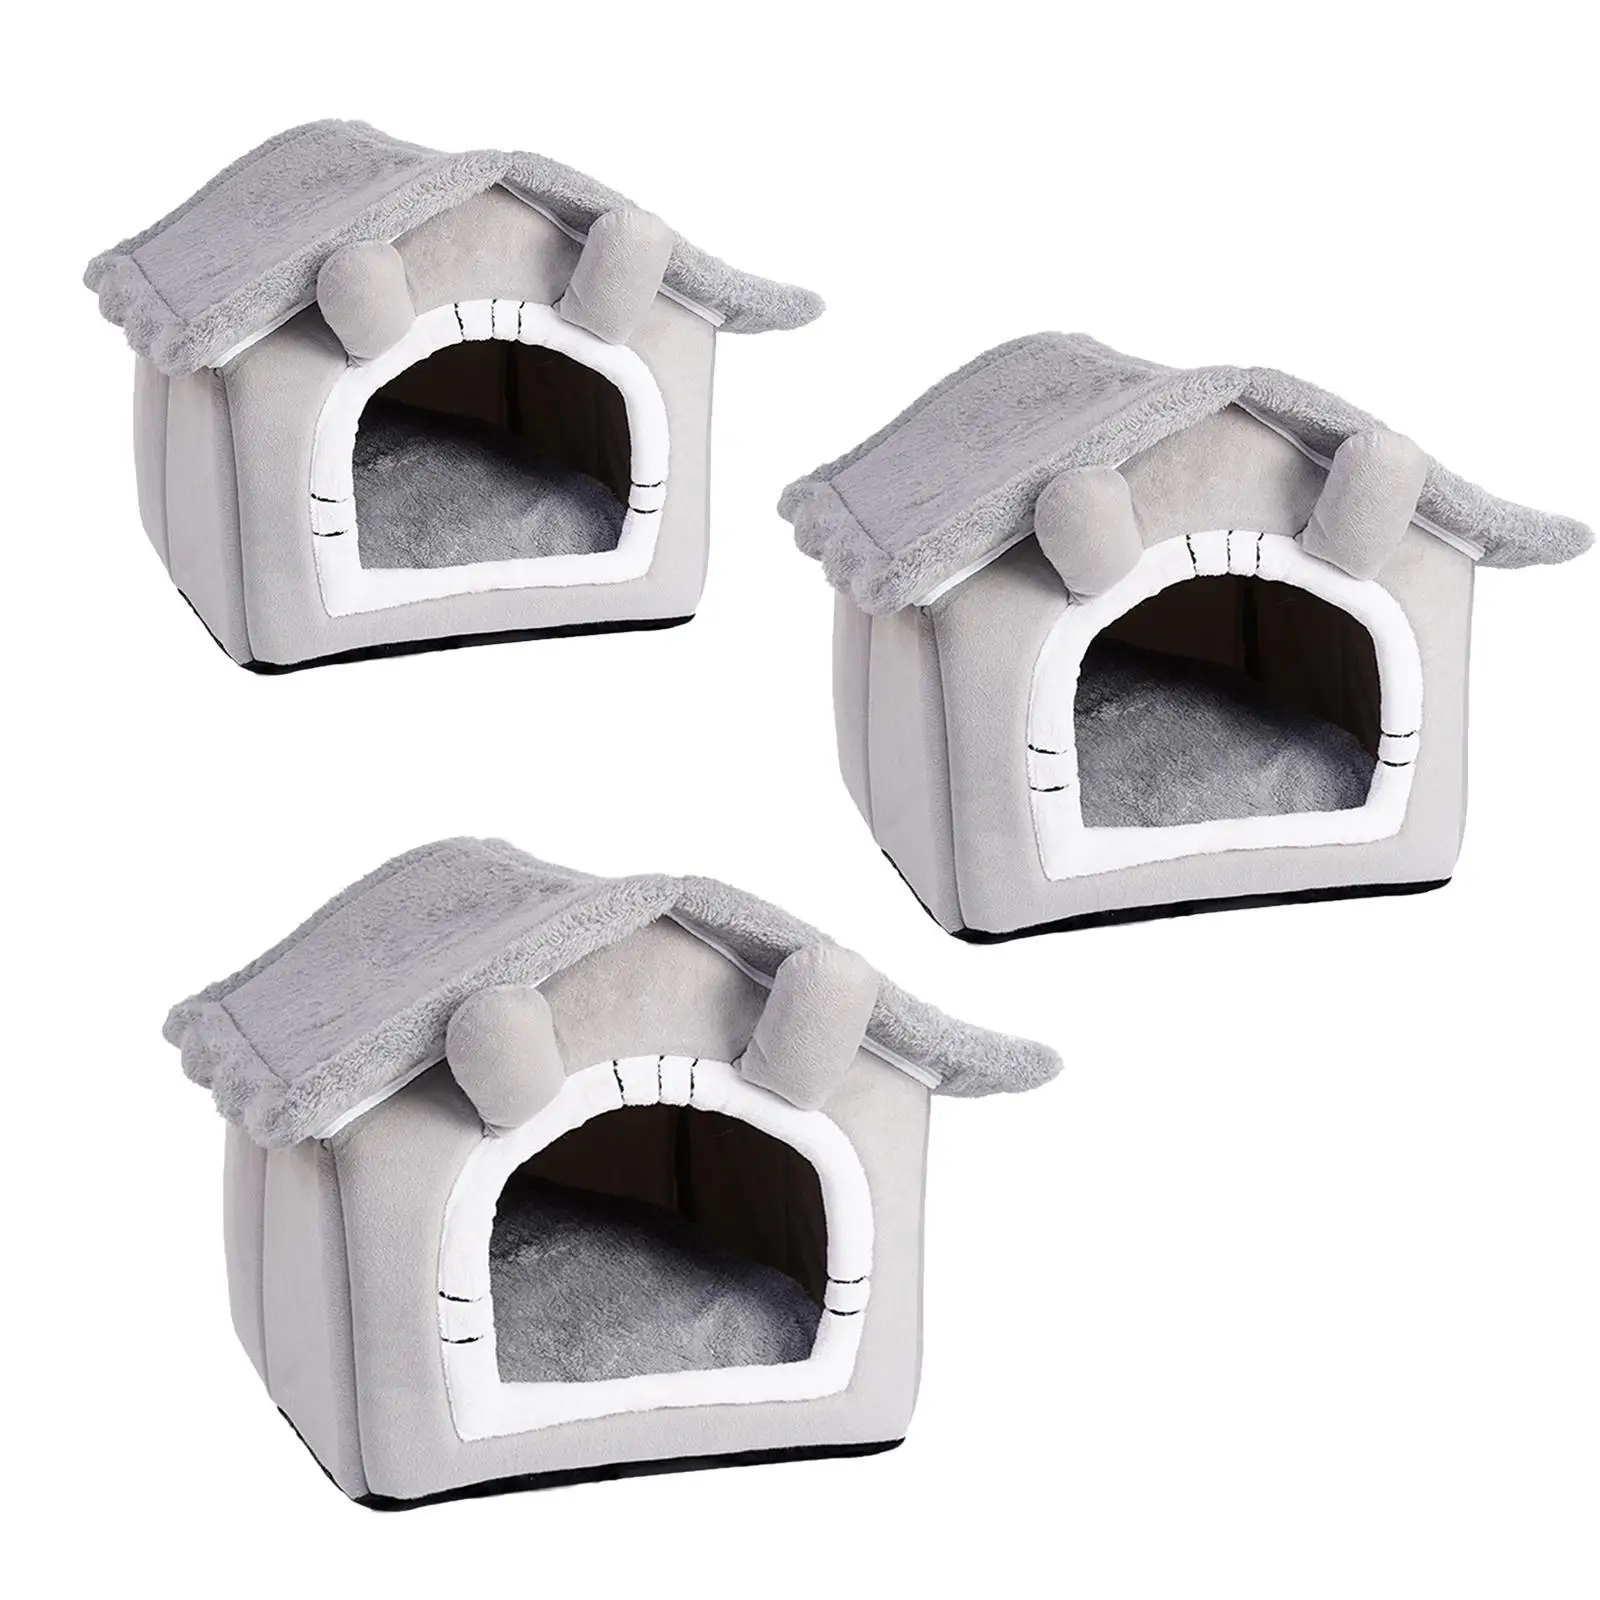 Bed Sleep Kennel Cozy Nest Removable Cushion Winter Warm